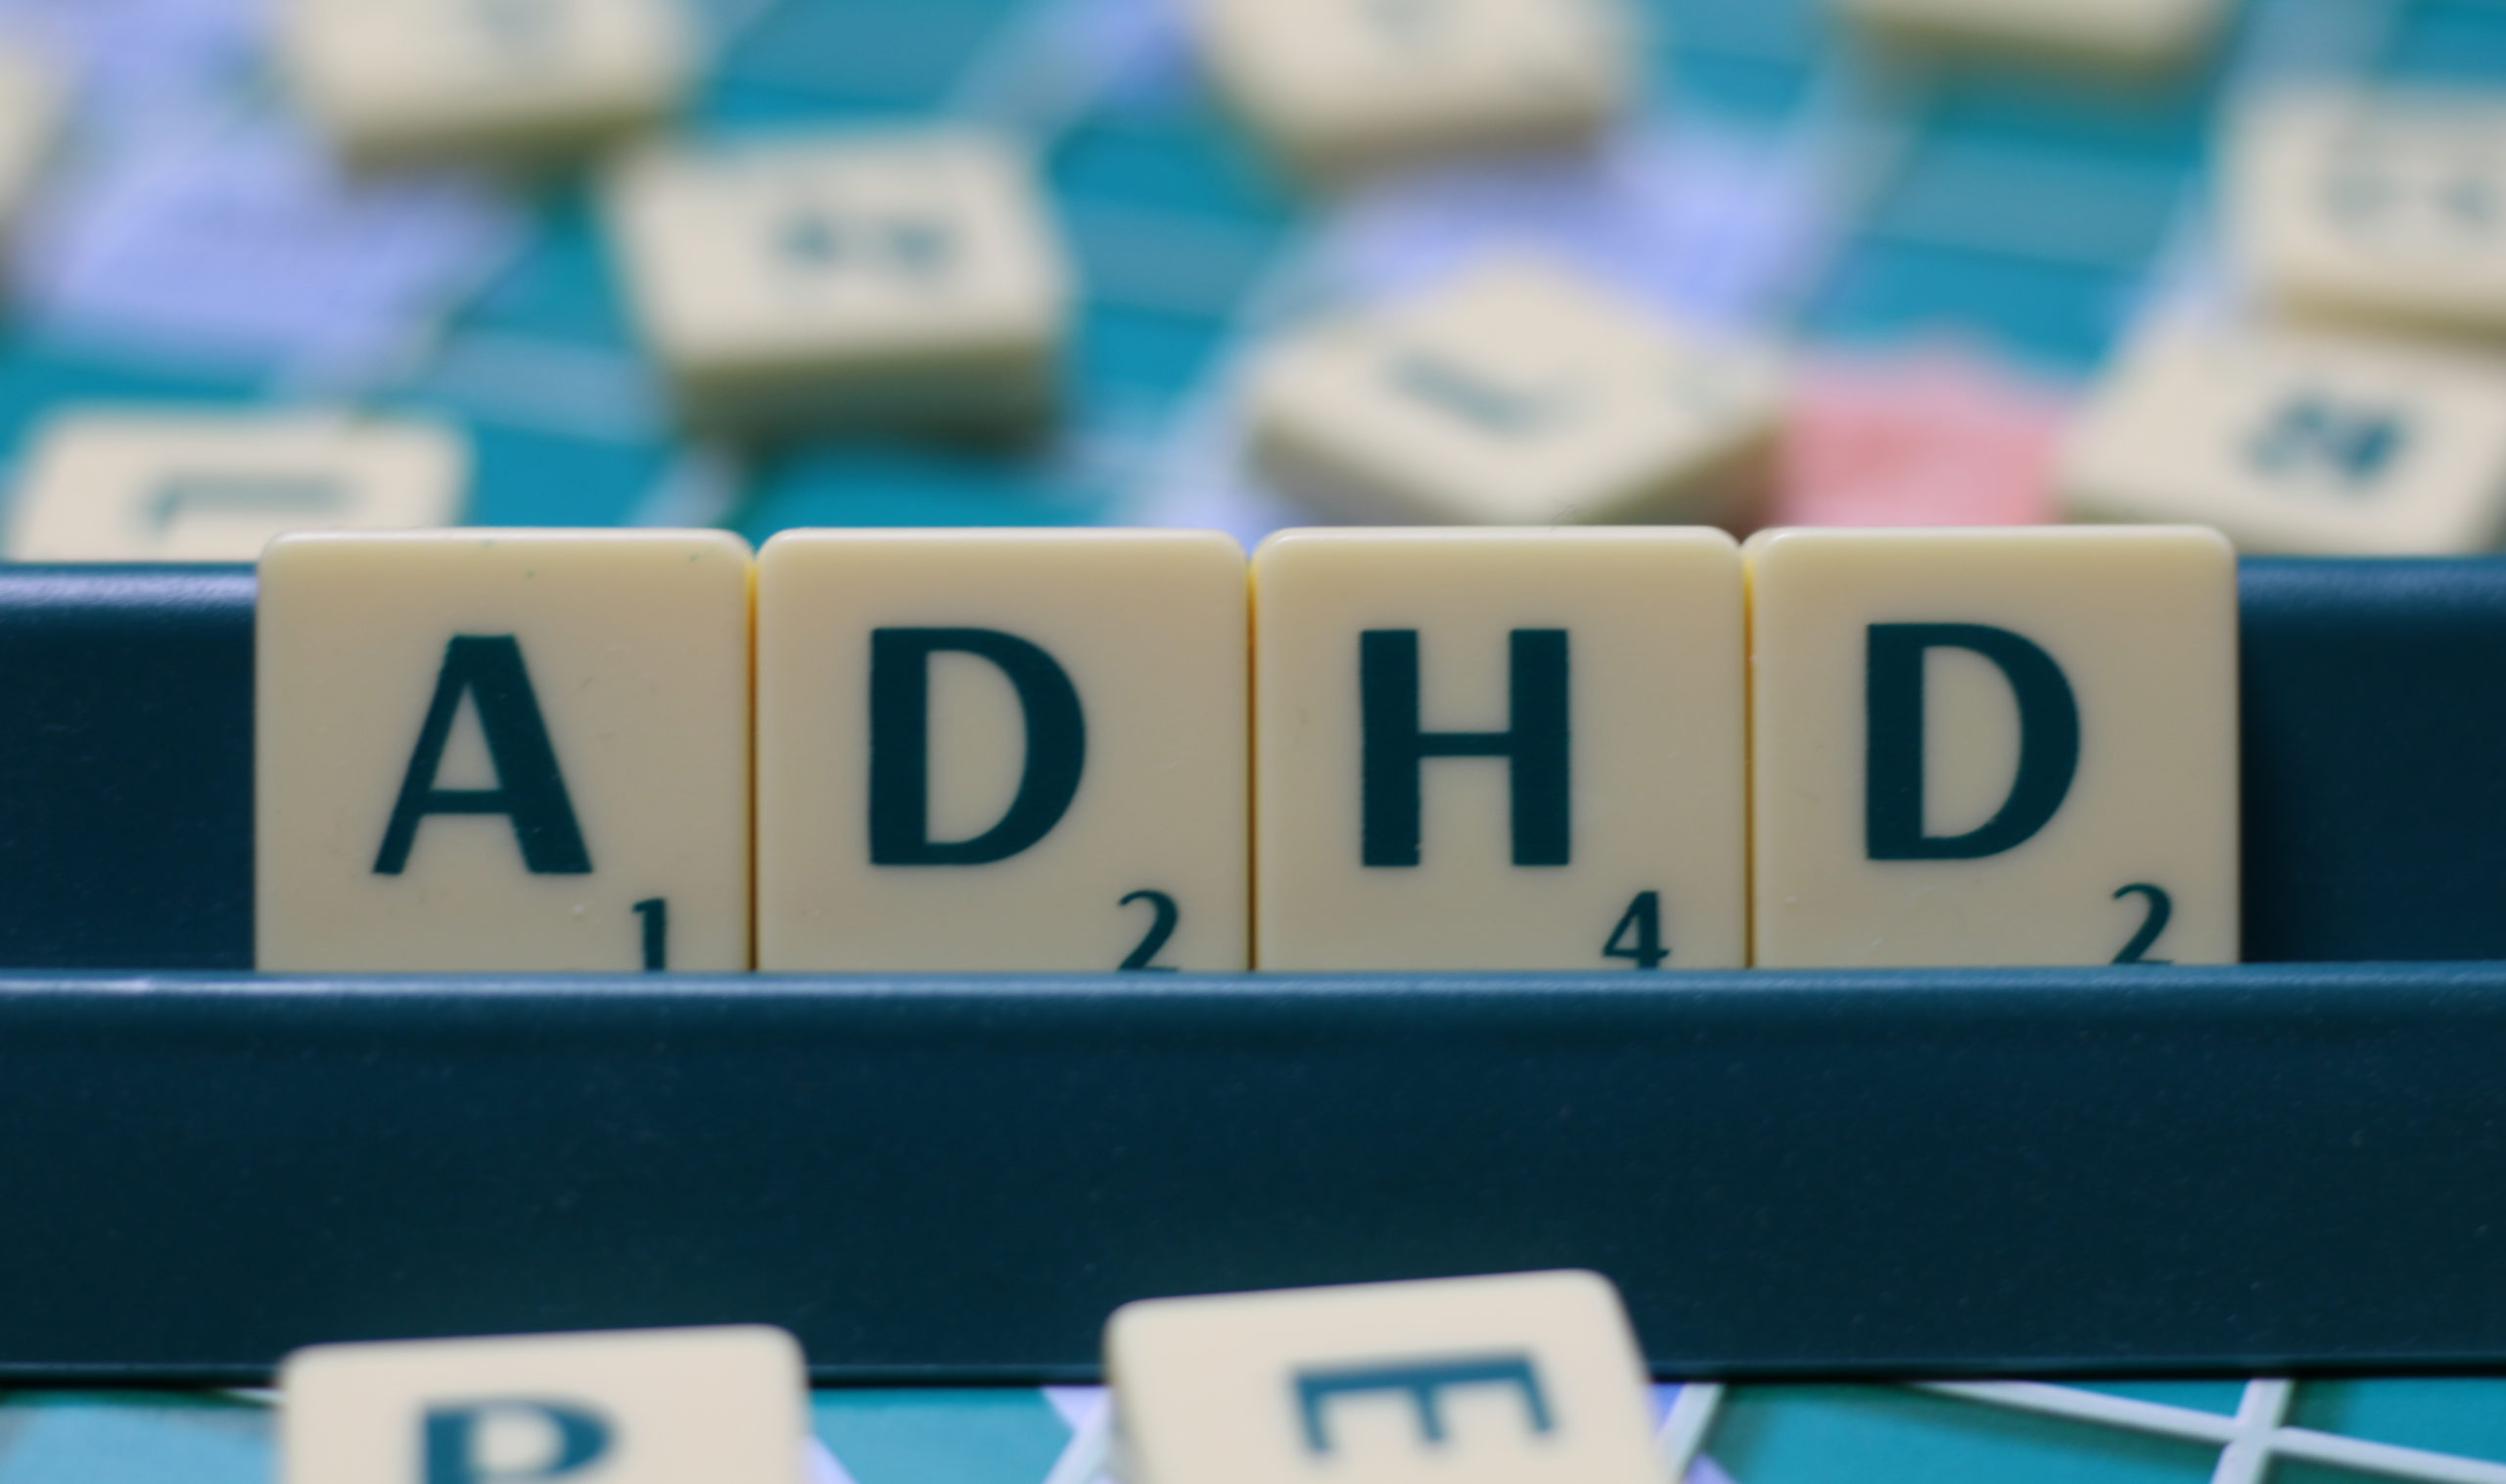 Some Scrabble tiles spell out, "ADHD," on a tile holder. Some more Scrabble tiles and a Scrabble board can be seen in the background.